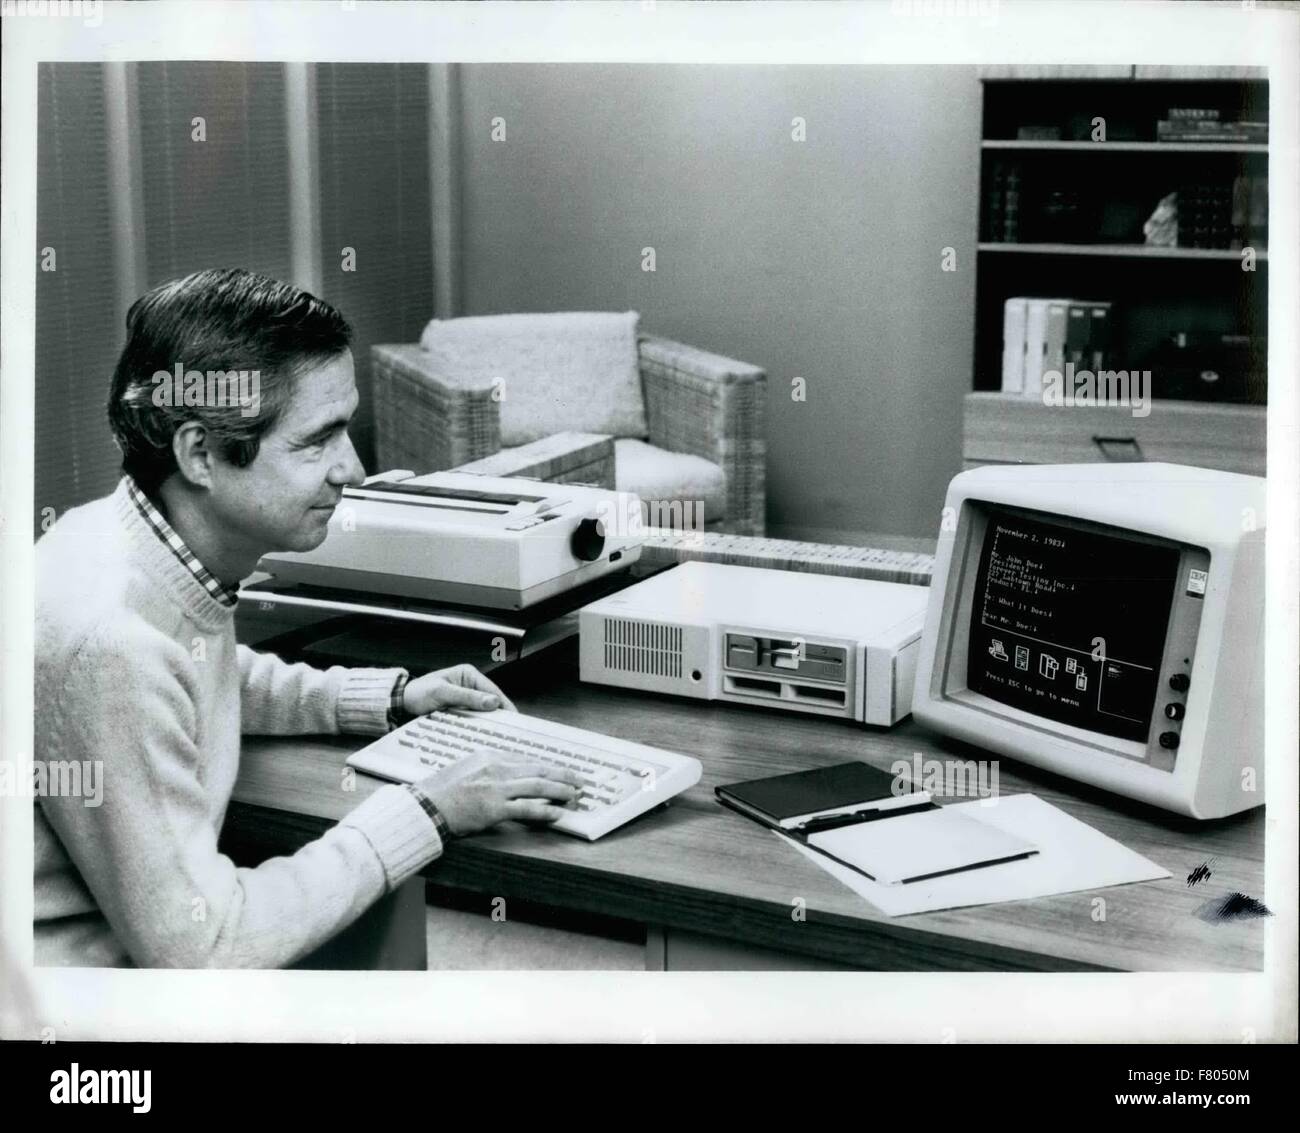 1981 - People Who Use An IBM Personal Computer at work can use many of the same IBM programs at home on a new PCjr equipped with a diskette drive and IBM Personal Computer Disk Operating System 2.1. The PCjr offers a number of advanced features including enhanced graphics and sound capabilities and an optional device which enables it to communicate with other computers. © Keystone Pictures USA/ZUMAPRESS.com/Alamy Live News Stock Photo